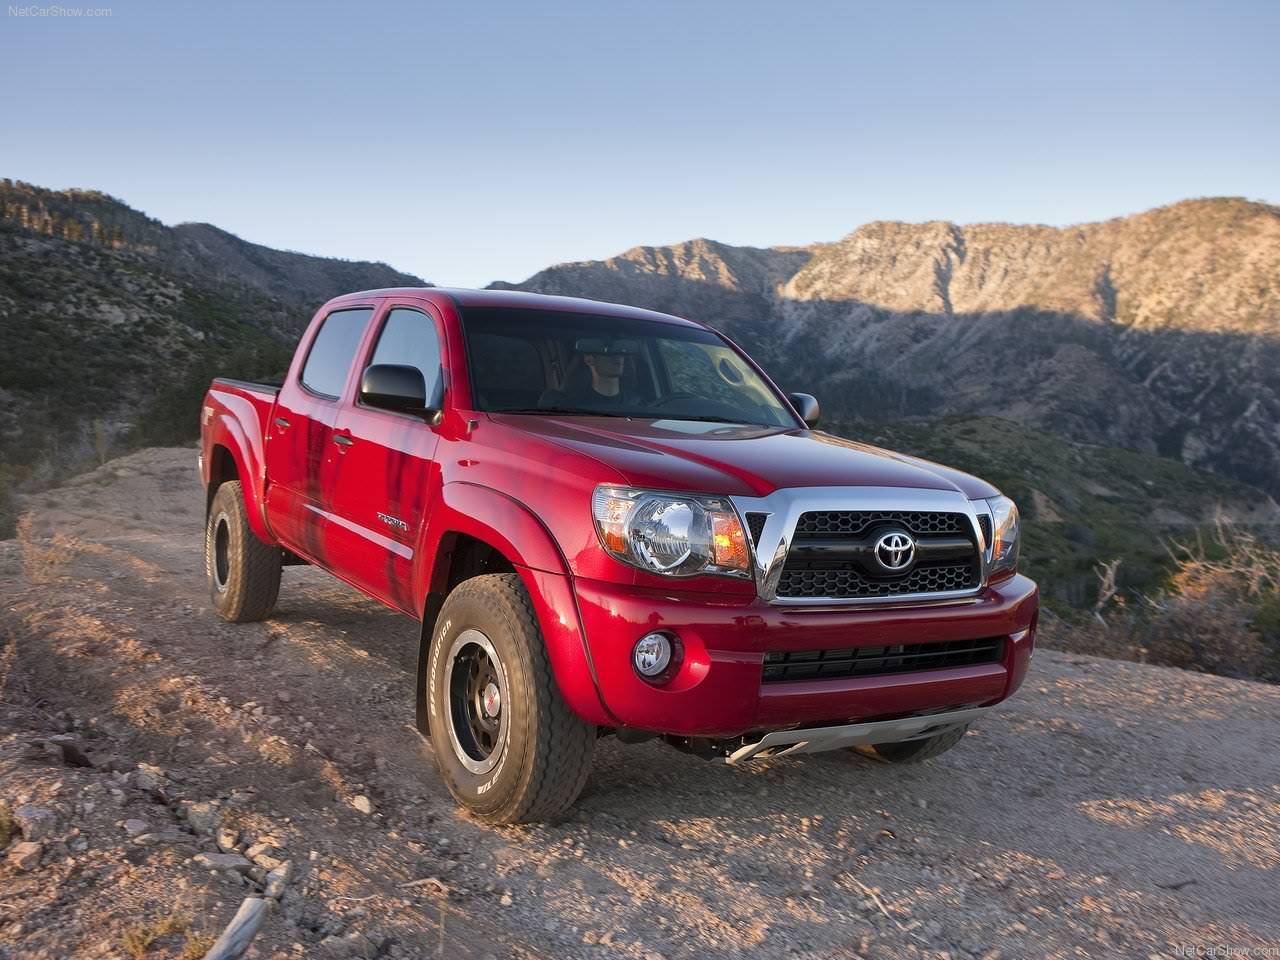 Toyota Cars: 2011 Toyota Tacoma Review